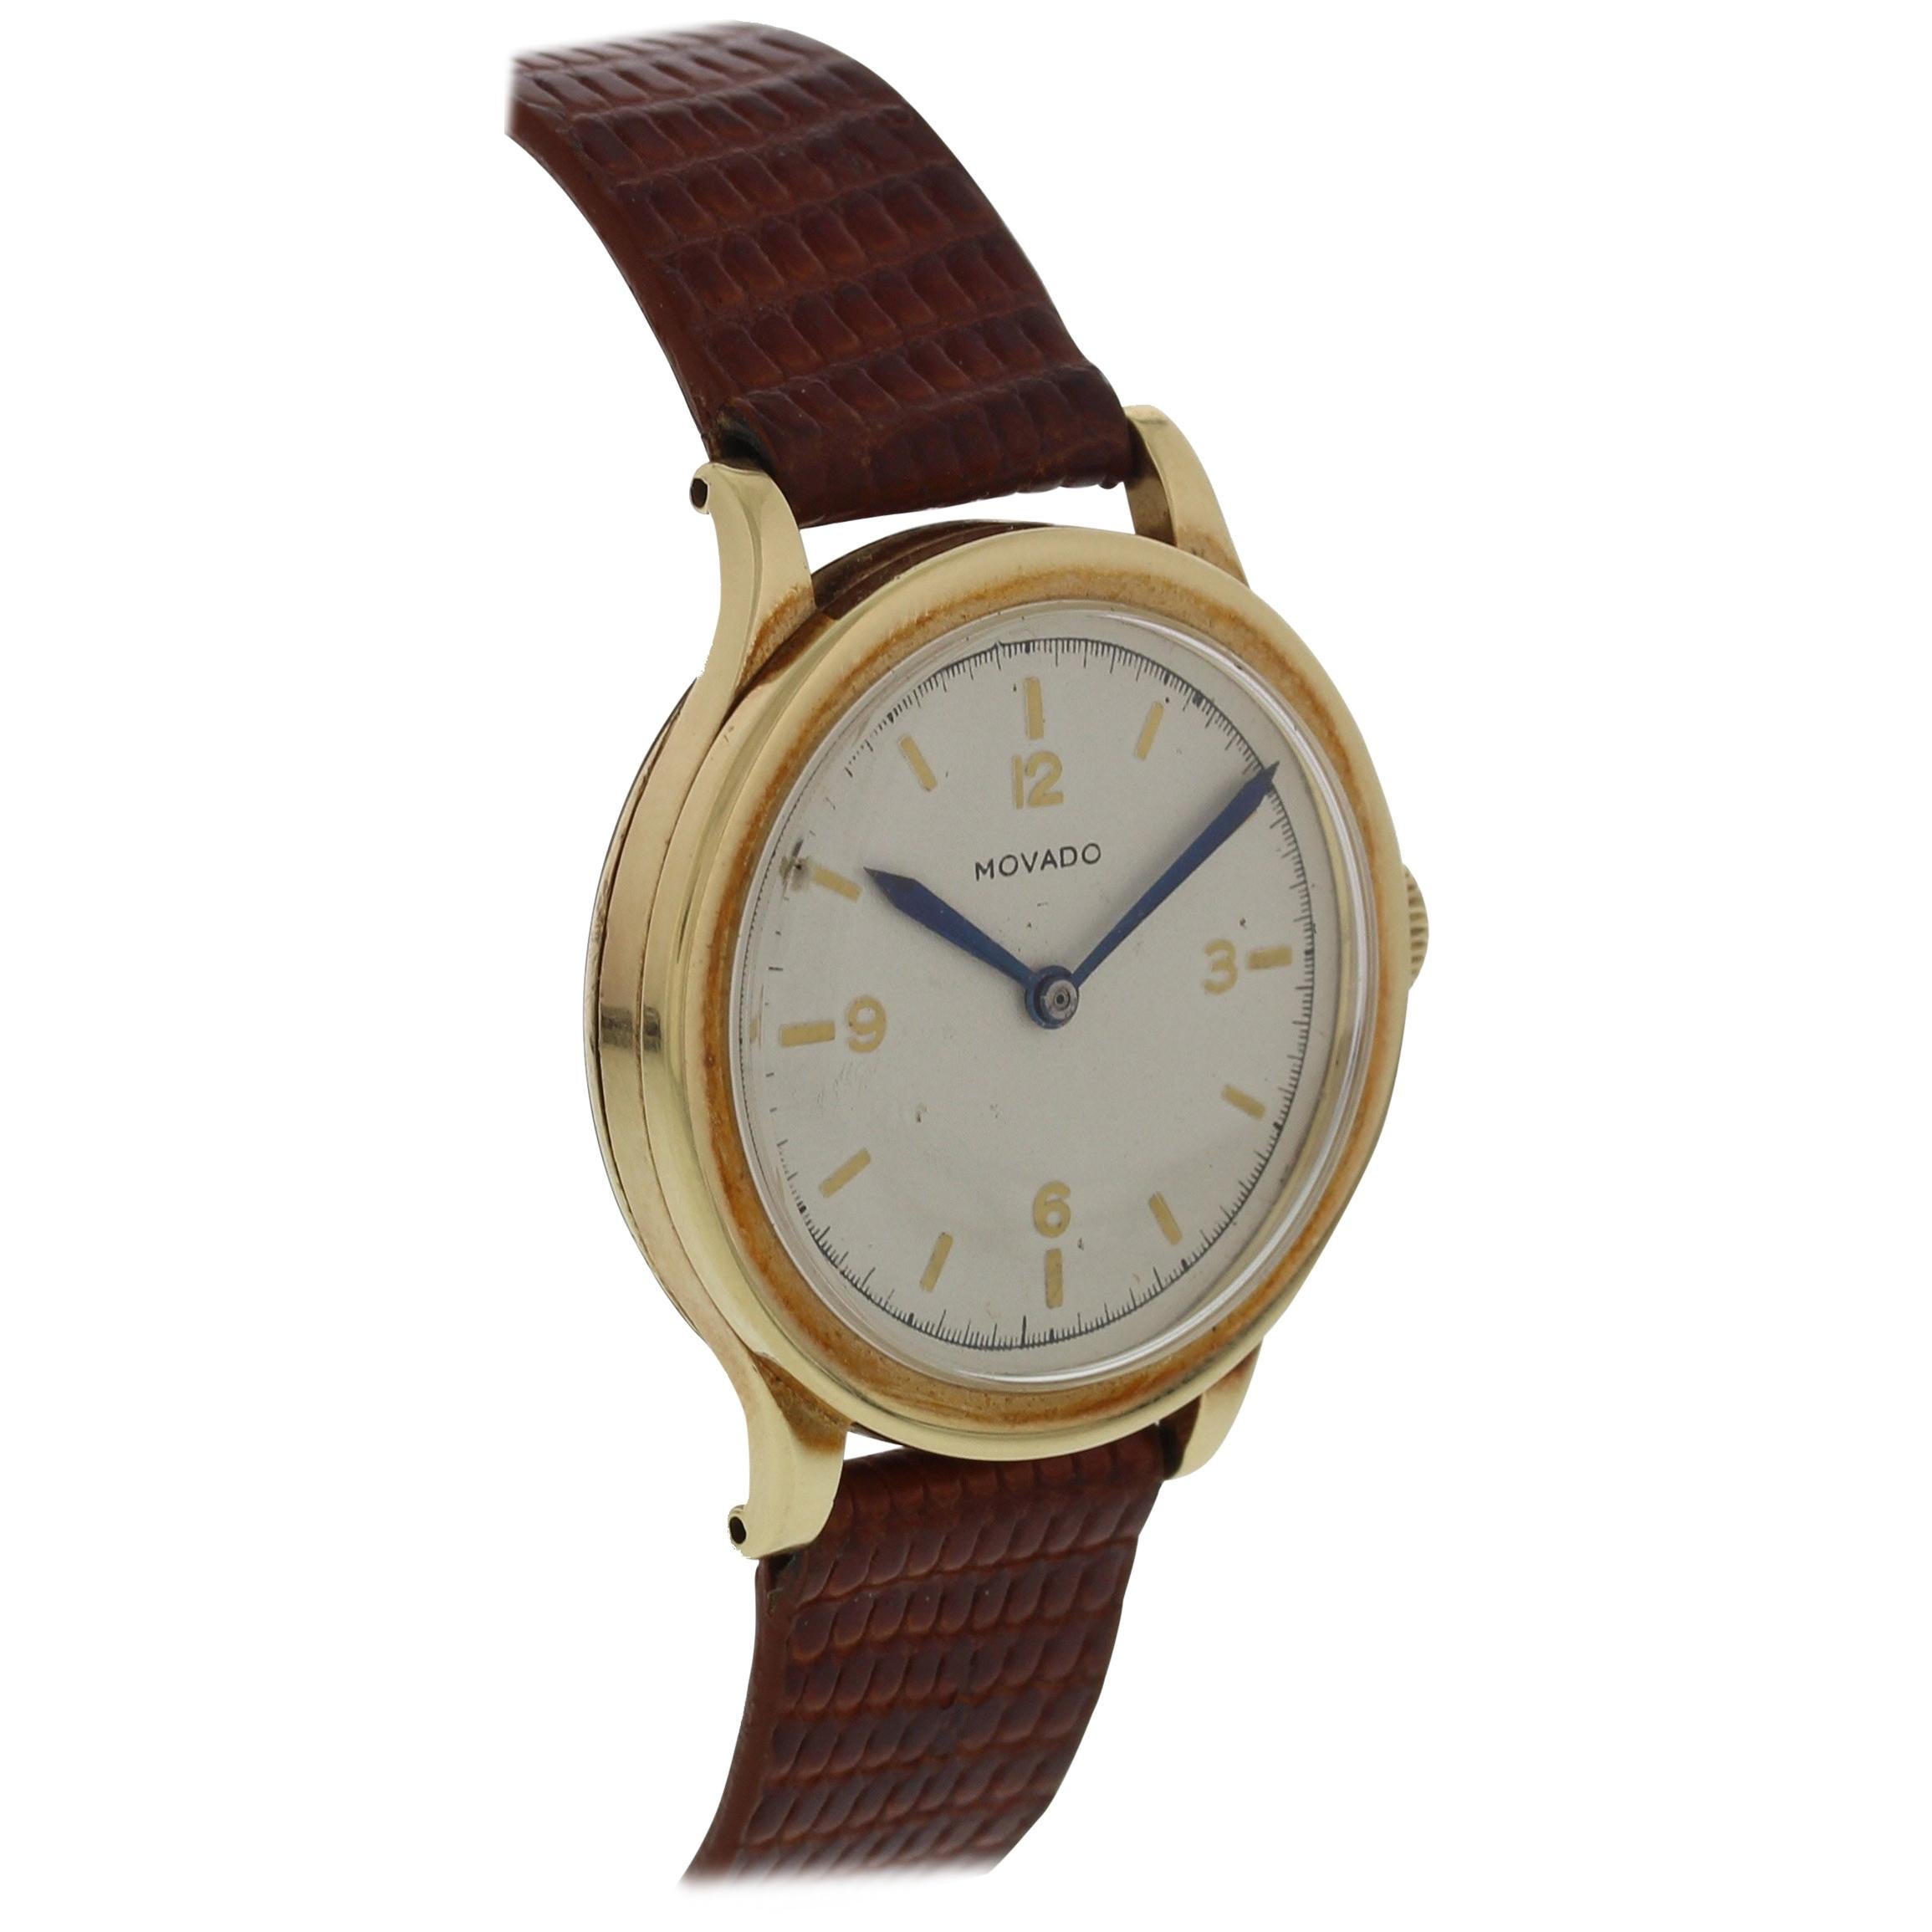 Vintage Movado Gold Toned Mechanical Hand Winding Watch For Sale